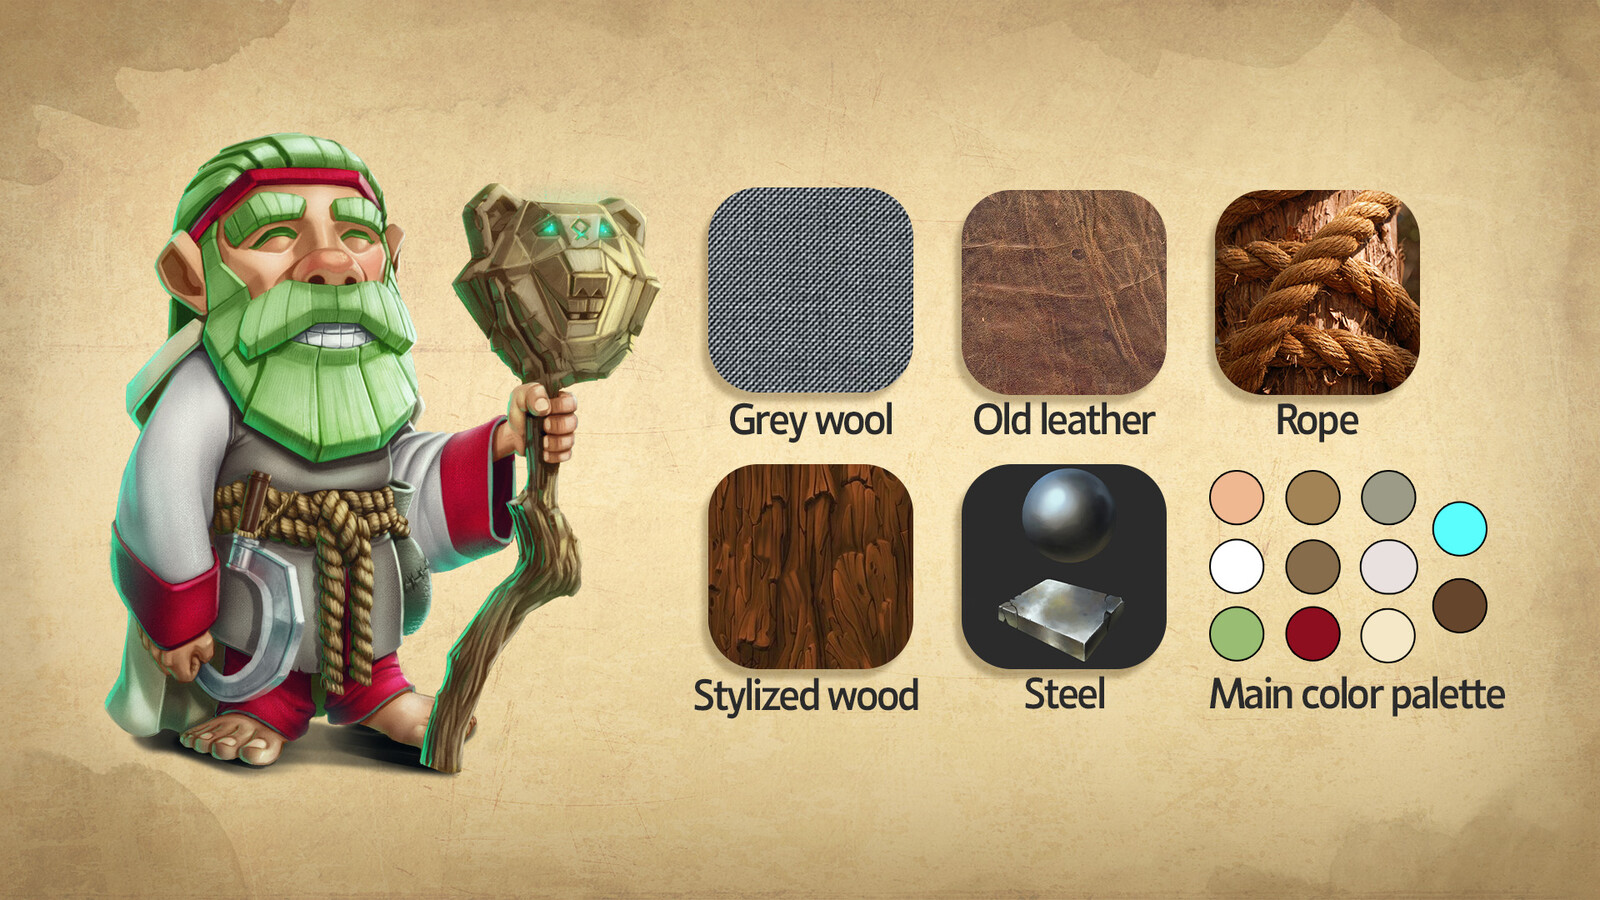 color palette and textures breakdown.
